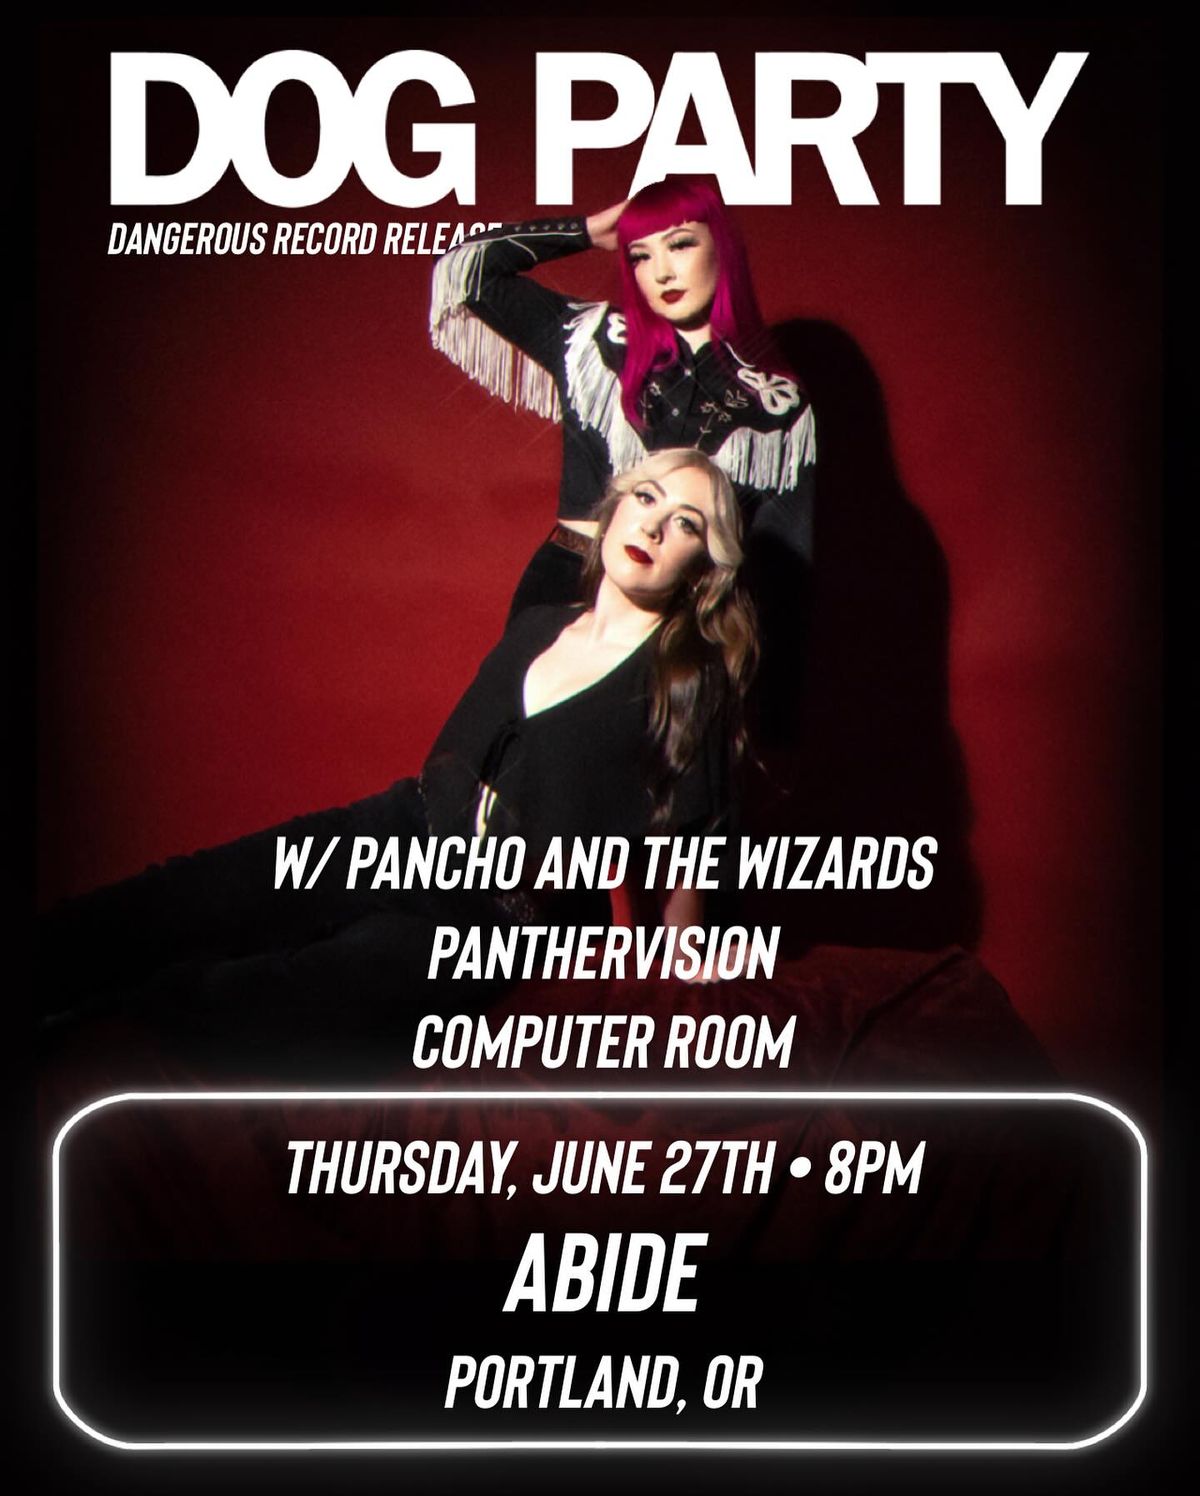 Dog Party, Pancho and the Wizards, Panthervision, Computer Room at Abide